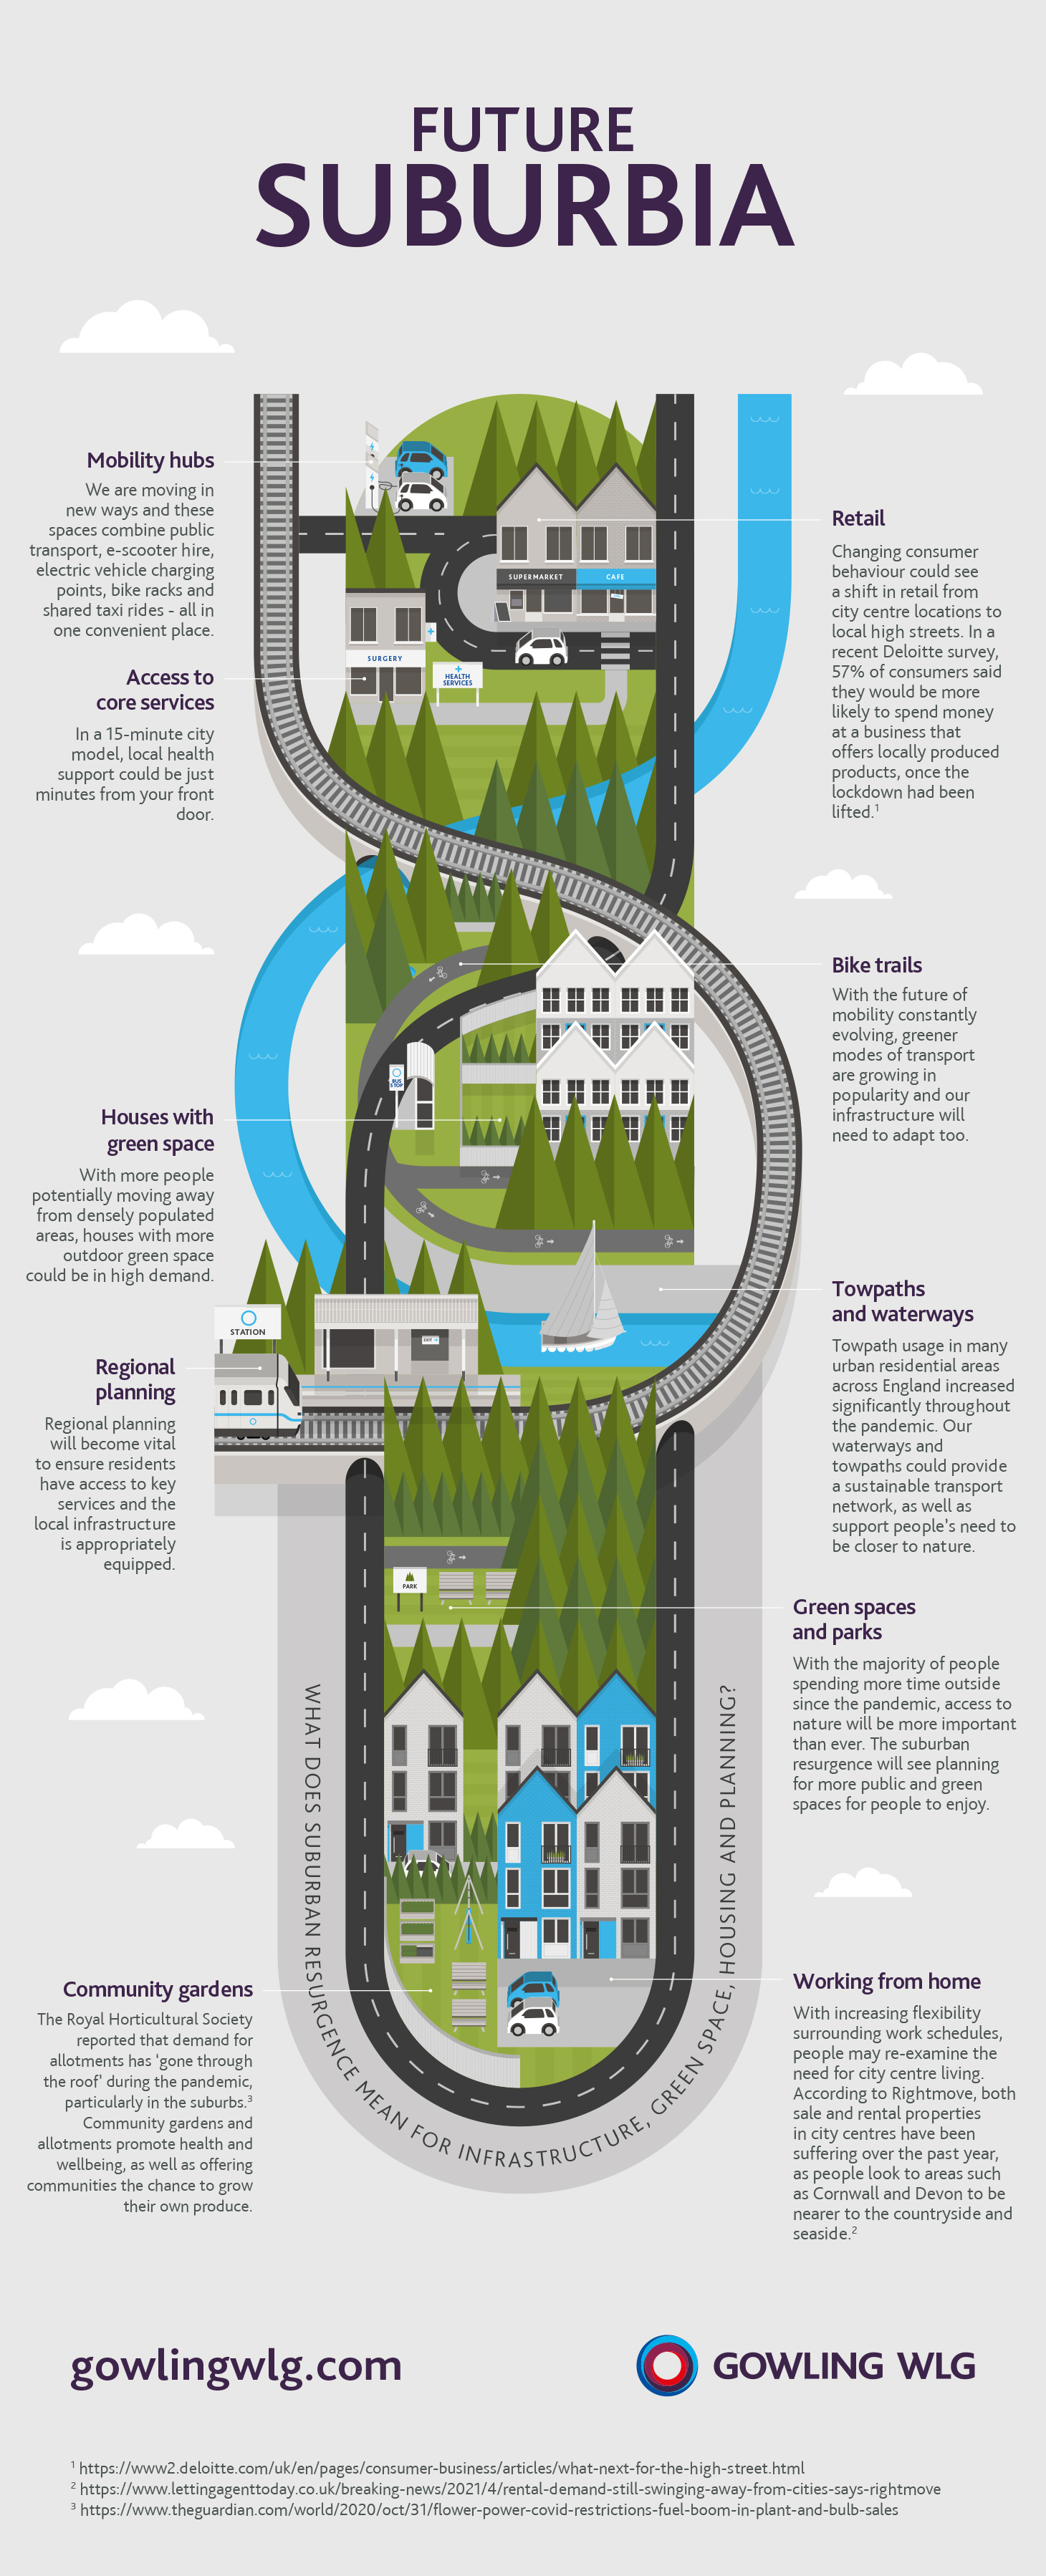 Infographic with the title of Future of Suburbia. The COVID-19 pandemic has affected the way we live our lives on so many levels. As a result, the idea of suburban resurgence is more topical than ever before. We've taken a closer look at what this could mean for infrastructure, green spaces, housing and planning - looking
at what this might mean for how we live in the future. Mobility hubs - We are moving in
new ways and these spaces combine public transport, e-scooter hire,
electric vehicle charging points, bike racks and shared taxi rides - all in one convenient place. Access to core services - In a 15-minute city model, local health support could be just minutes from your front door. Houses with green space - With more people potentially moving away from densely populated areas, houses with more outdoor green space could be in high demand. Regional planning - Regional planning
will become vital to ensure residents have access to key services and the
local infrastructure is appropriately equipped. Community gardens - The Royal Horticultural Society reported that demand for allotments has 'gone through the roof' during the pandemic, particularly in the suburbs. Community gardens and
allotments promote health and wellbeing, as well as offering communities the chance to grow their own produce. Retail - Changing consumer behaviour could see a shift in retail from city centre locations to local high streets. In a recent Deloitte survey,
57% of consumers said they would be more likely to spend money at a business that
offers locally produced products, once the lockdown had been lifted. Towpaths and waterways - Towpath usage in many urban residential areas across England increased
significantly throughout the pandemic. Our waterways and towpaths could provide
a sustainable transport network, as well as support people's need to be closer to nature. green spaces and parks - With the majority of people spending more time outside since the pandemic, access to nature will be more important than ever. The suburban
resurgence will see planning for more public and green spaces for people to enjoy.